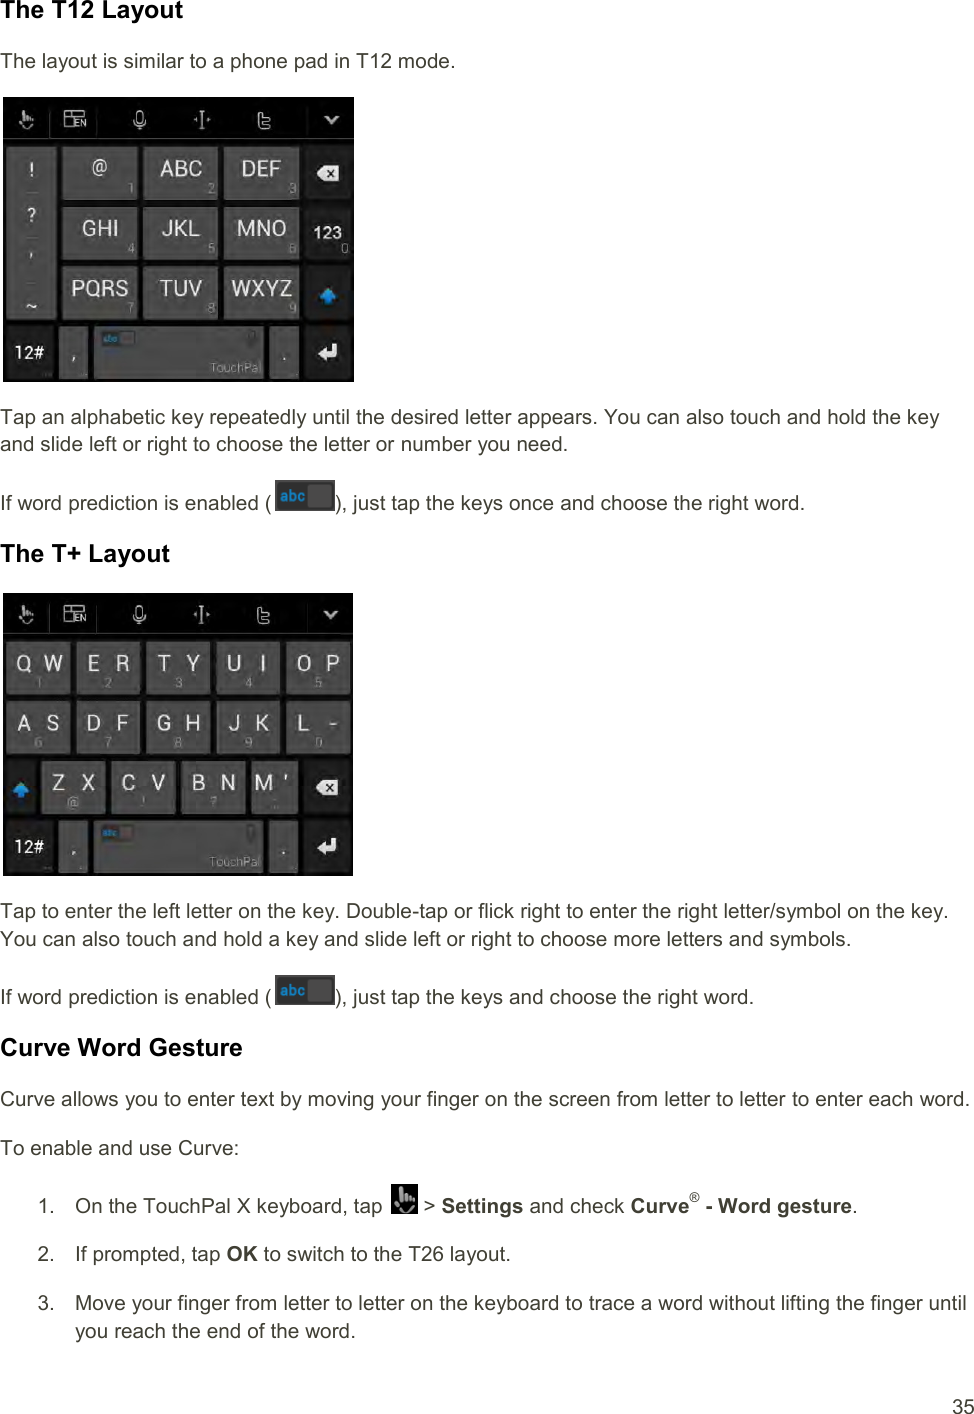  35 The T12 Layout The layout is similar to a phone pad in T12 mode.  Tap an alphabetic key repeatedly until the desired letter appears. You can also touch and hold the key and slide left or right to choose the letter or number you need. If word prediction is enabled ( ), just tap the keys once and choose the right word. The T+ Layout  Tap to enter the left letter on the key. Double-tap or flick right to enter the right letter/symbol on the key. You can also touch and hold a key and slide left or right to choose more letters and symbols. If word prediction is enabled ( ), just tap the keys and choose the right word. Curve Word Gesture Curve allows you to enter text by moving your finger on the screen from letter to letter to enter each word. To enable and use Curve: 1.  On the TouchPal X keyboard, tap   &gt; Settings and check Curve® - Word gesture. 2.  If prompted, tap OK to switch to the T26 layout. 3.  Move your finger from letter to letter on the keyboard to trace a word without lifting the finger until you reach the end of the word. 